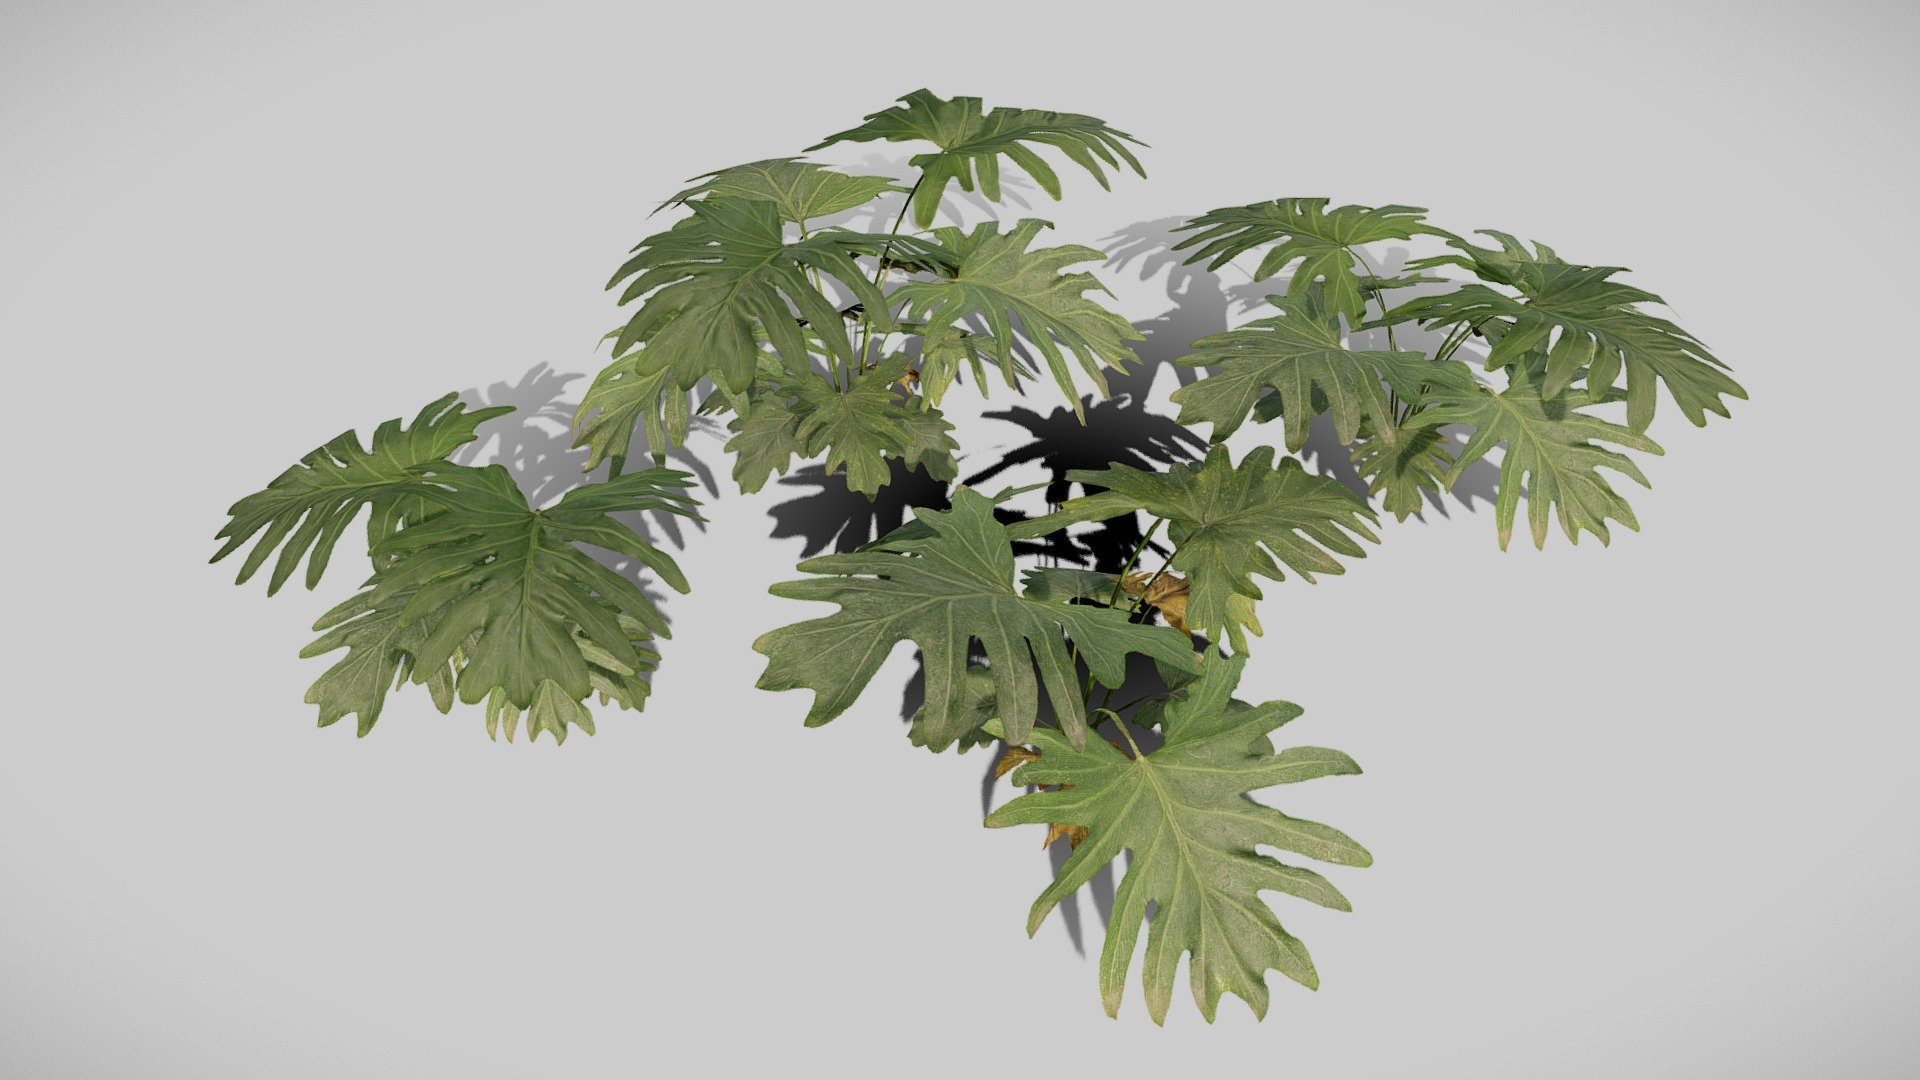 Product Details:

3D Models:

.fbx and .OBJ files

Game-Ready asset

LODs + Billboard

4 different Plant Variations

Textures:

4K textures

.tif and .png format

*Maps:

-Albedo (RGBA)

-Normal

-Roughness

-Thickness 

-Opacity

-Height

-AO

-Metallic

-Unity Mask (HDRP)

Join my Discord Server for doubts, issues, and support 3d model